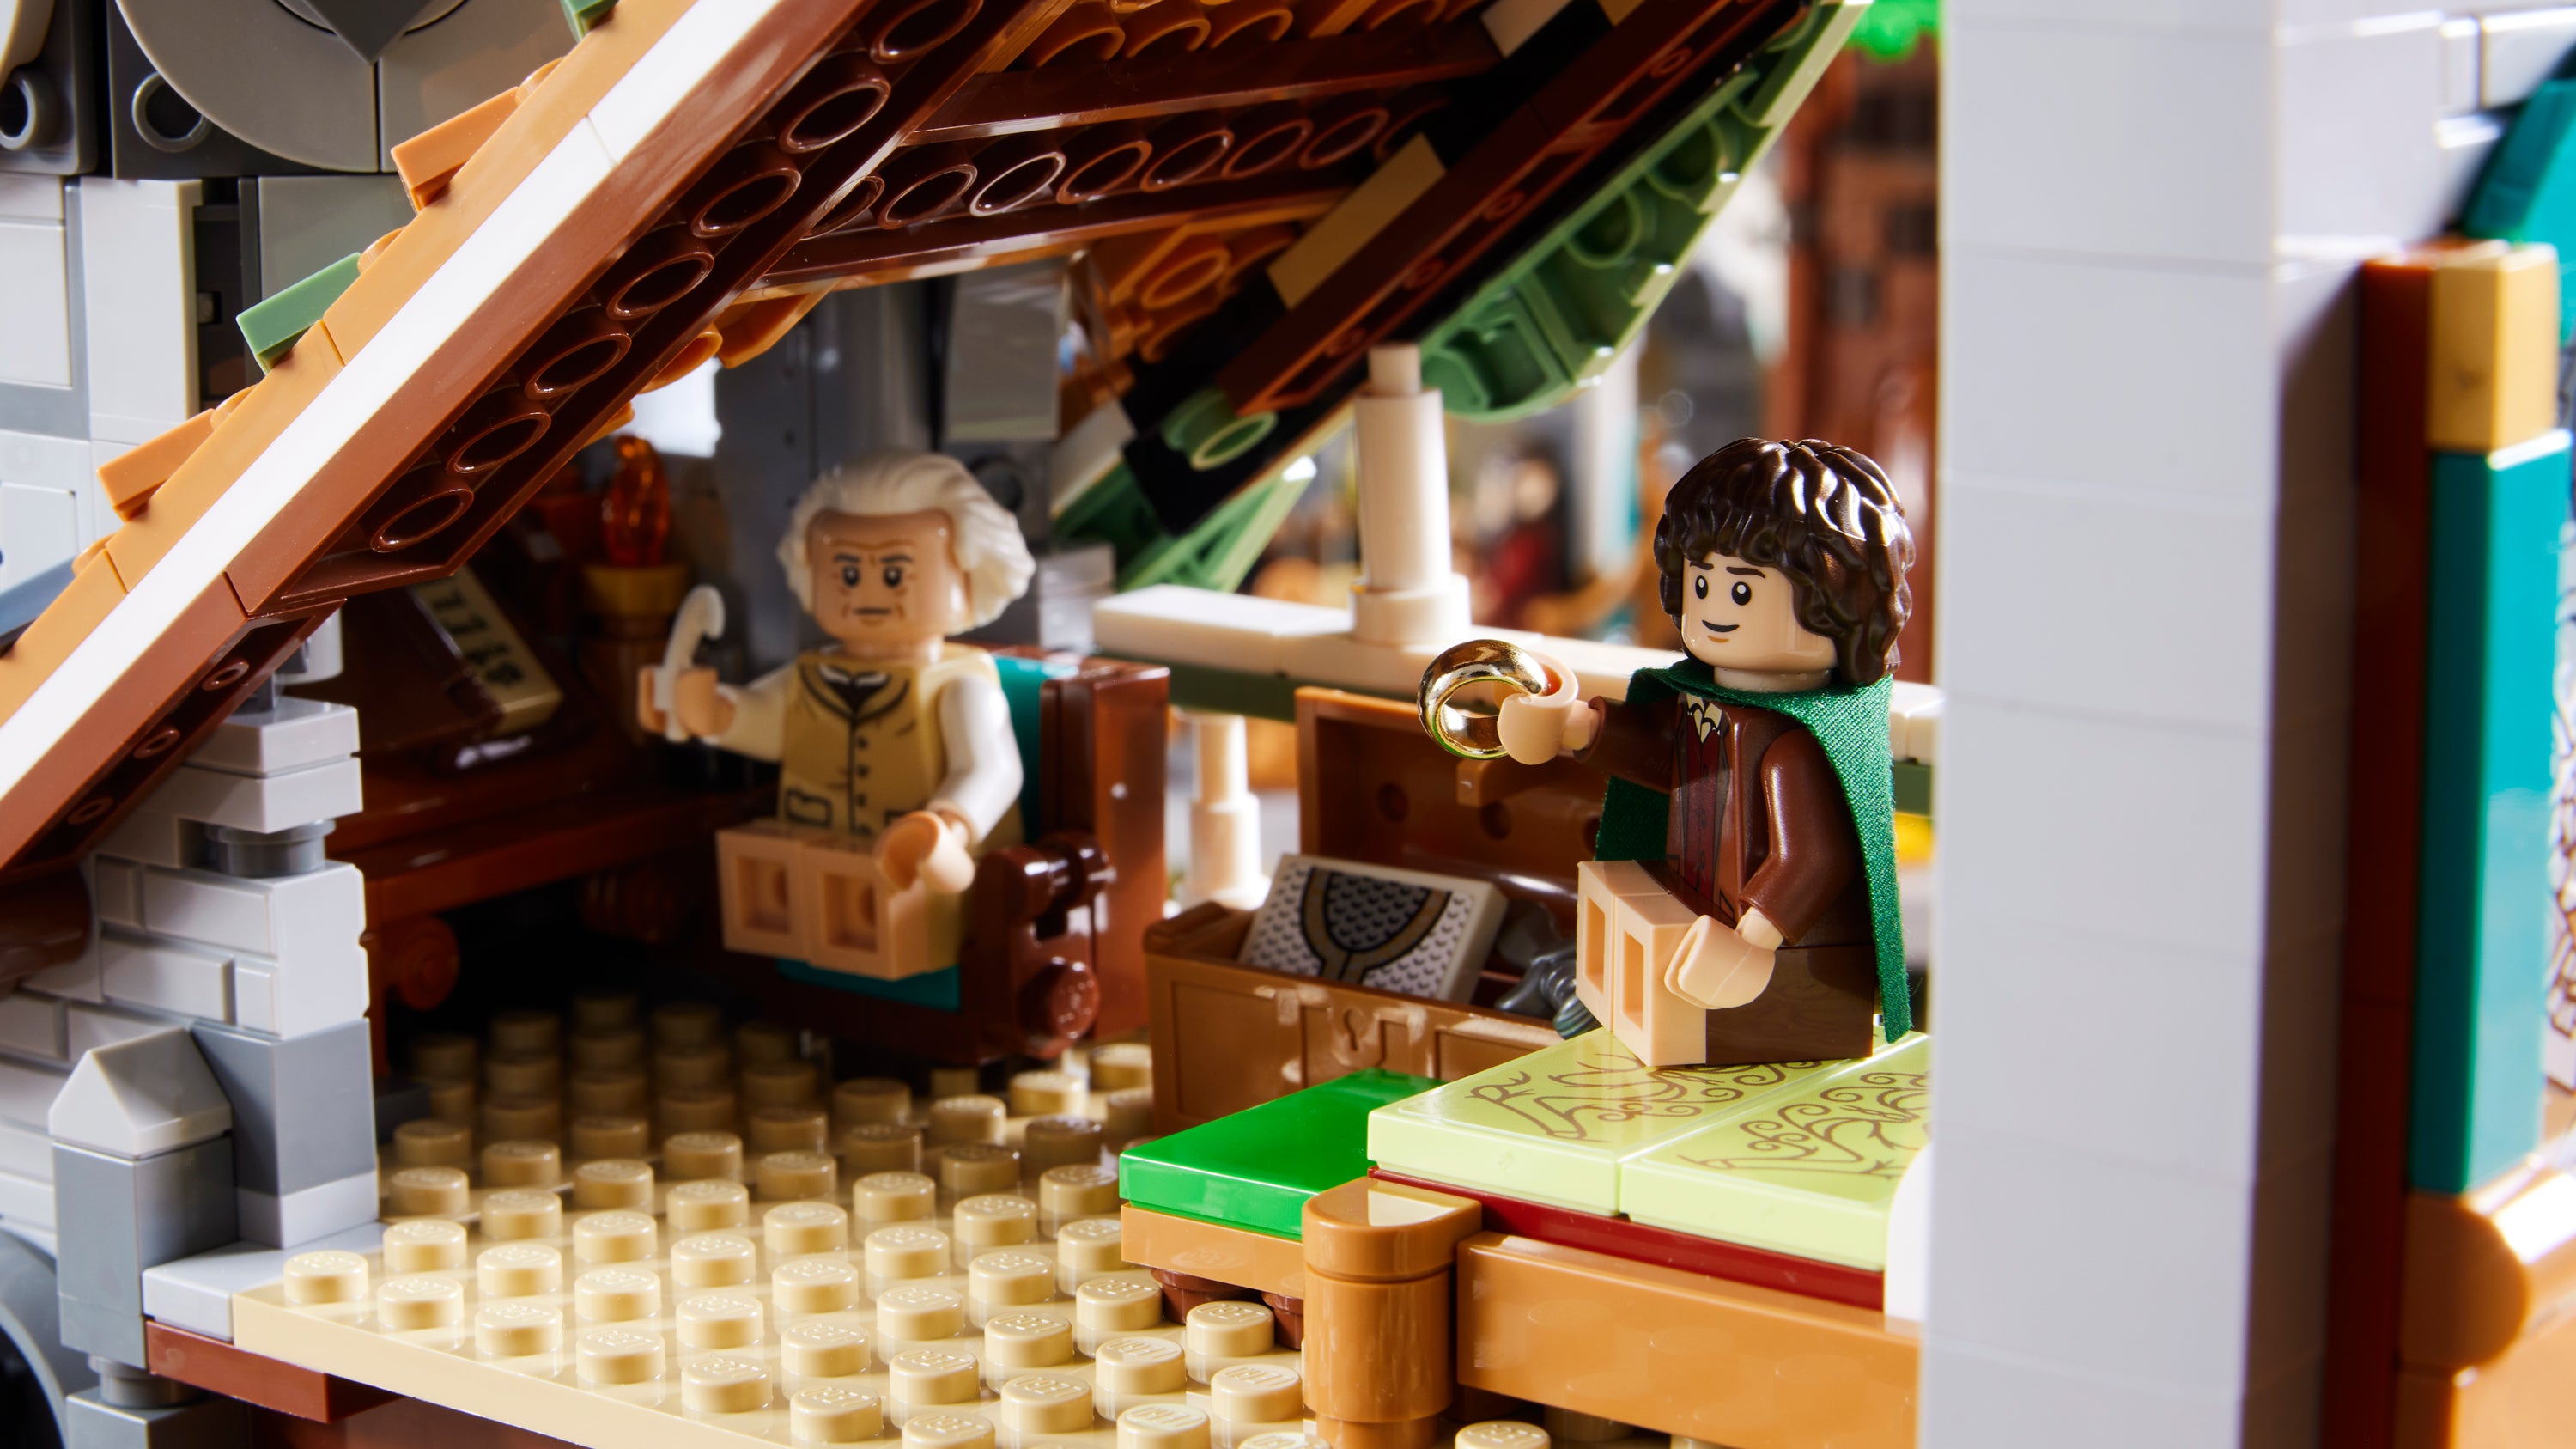 The 6,167-Piece Rivendell Is the One LEGO Lord of the Rings Set to Rule Them All